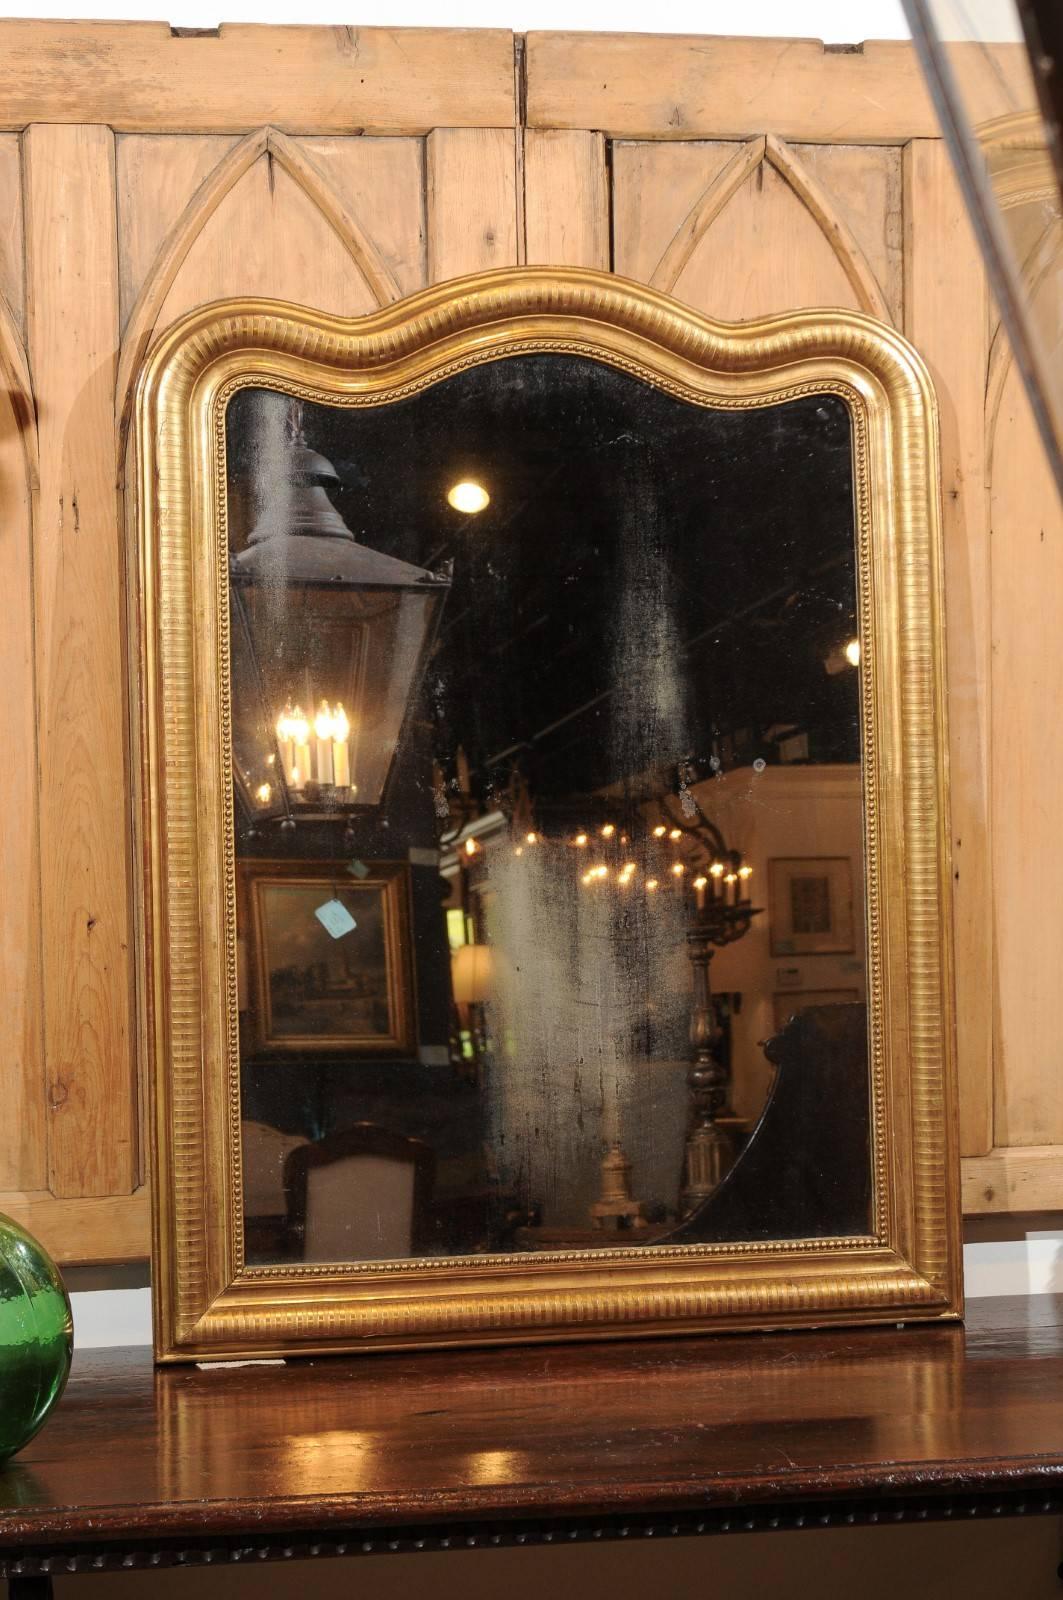 A French 19th century Louis-Philippe gold gilt mirror with rare curved top. This French Louis-Philippe mirror features a rectangular gilded frame adorned with nice patterns on the surround and surmounted with an uncommon top made of sinuous lines.